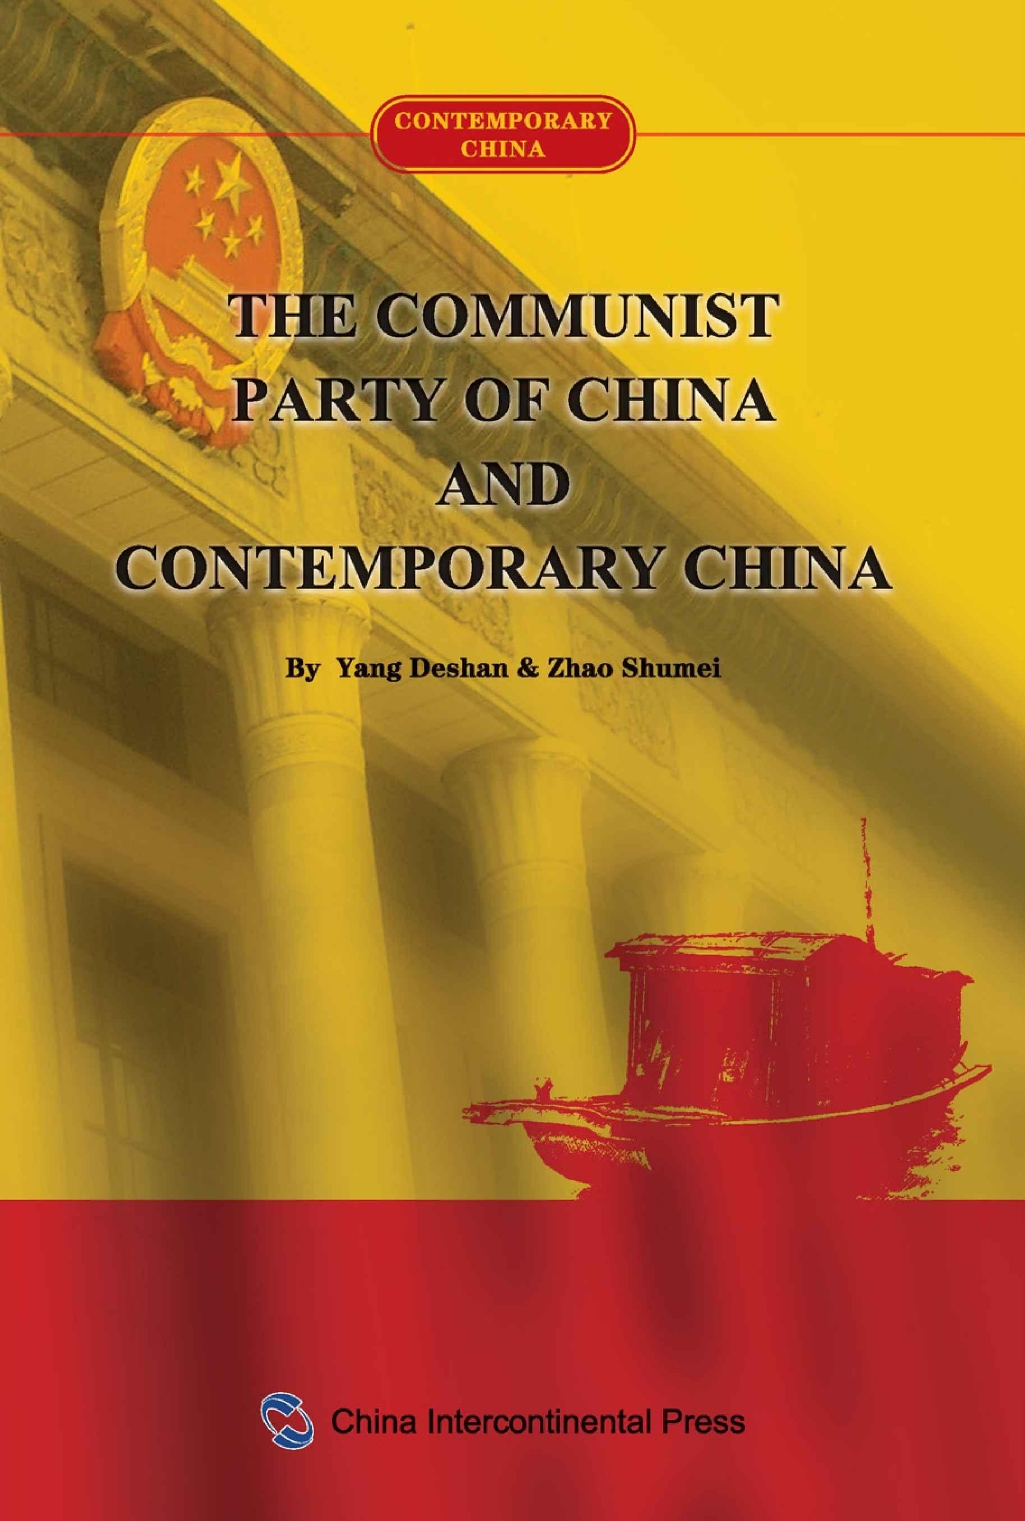 The Communist Party of China and Contemporary China